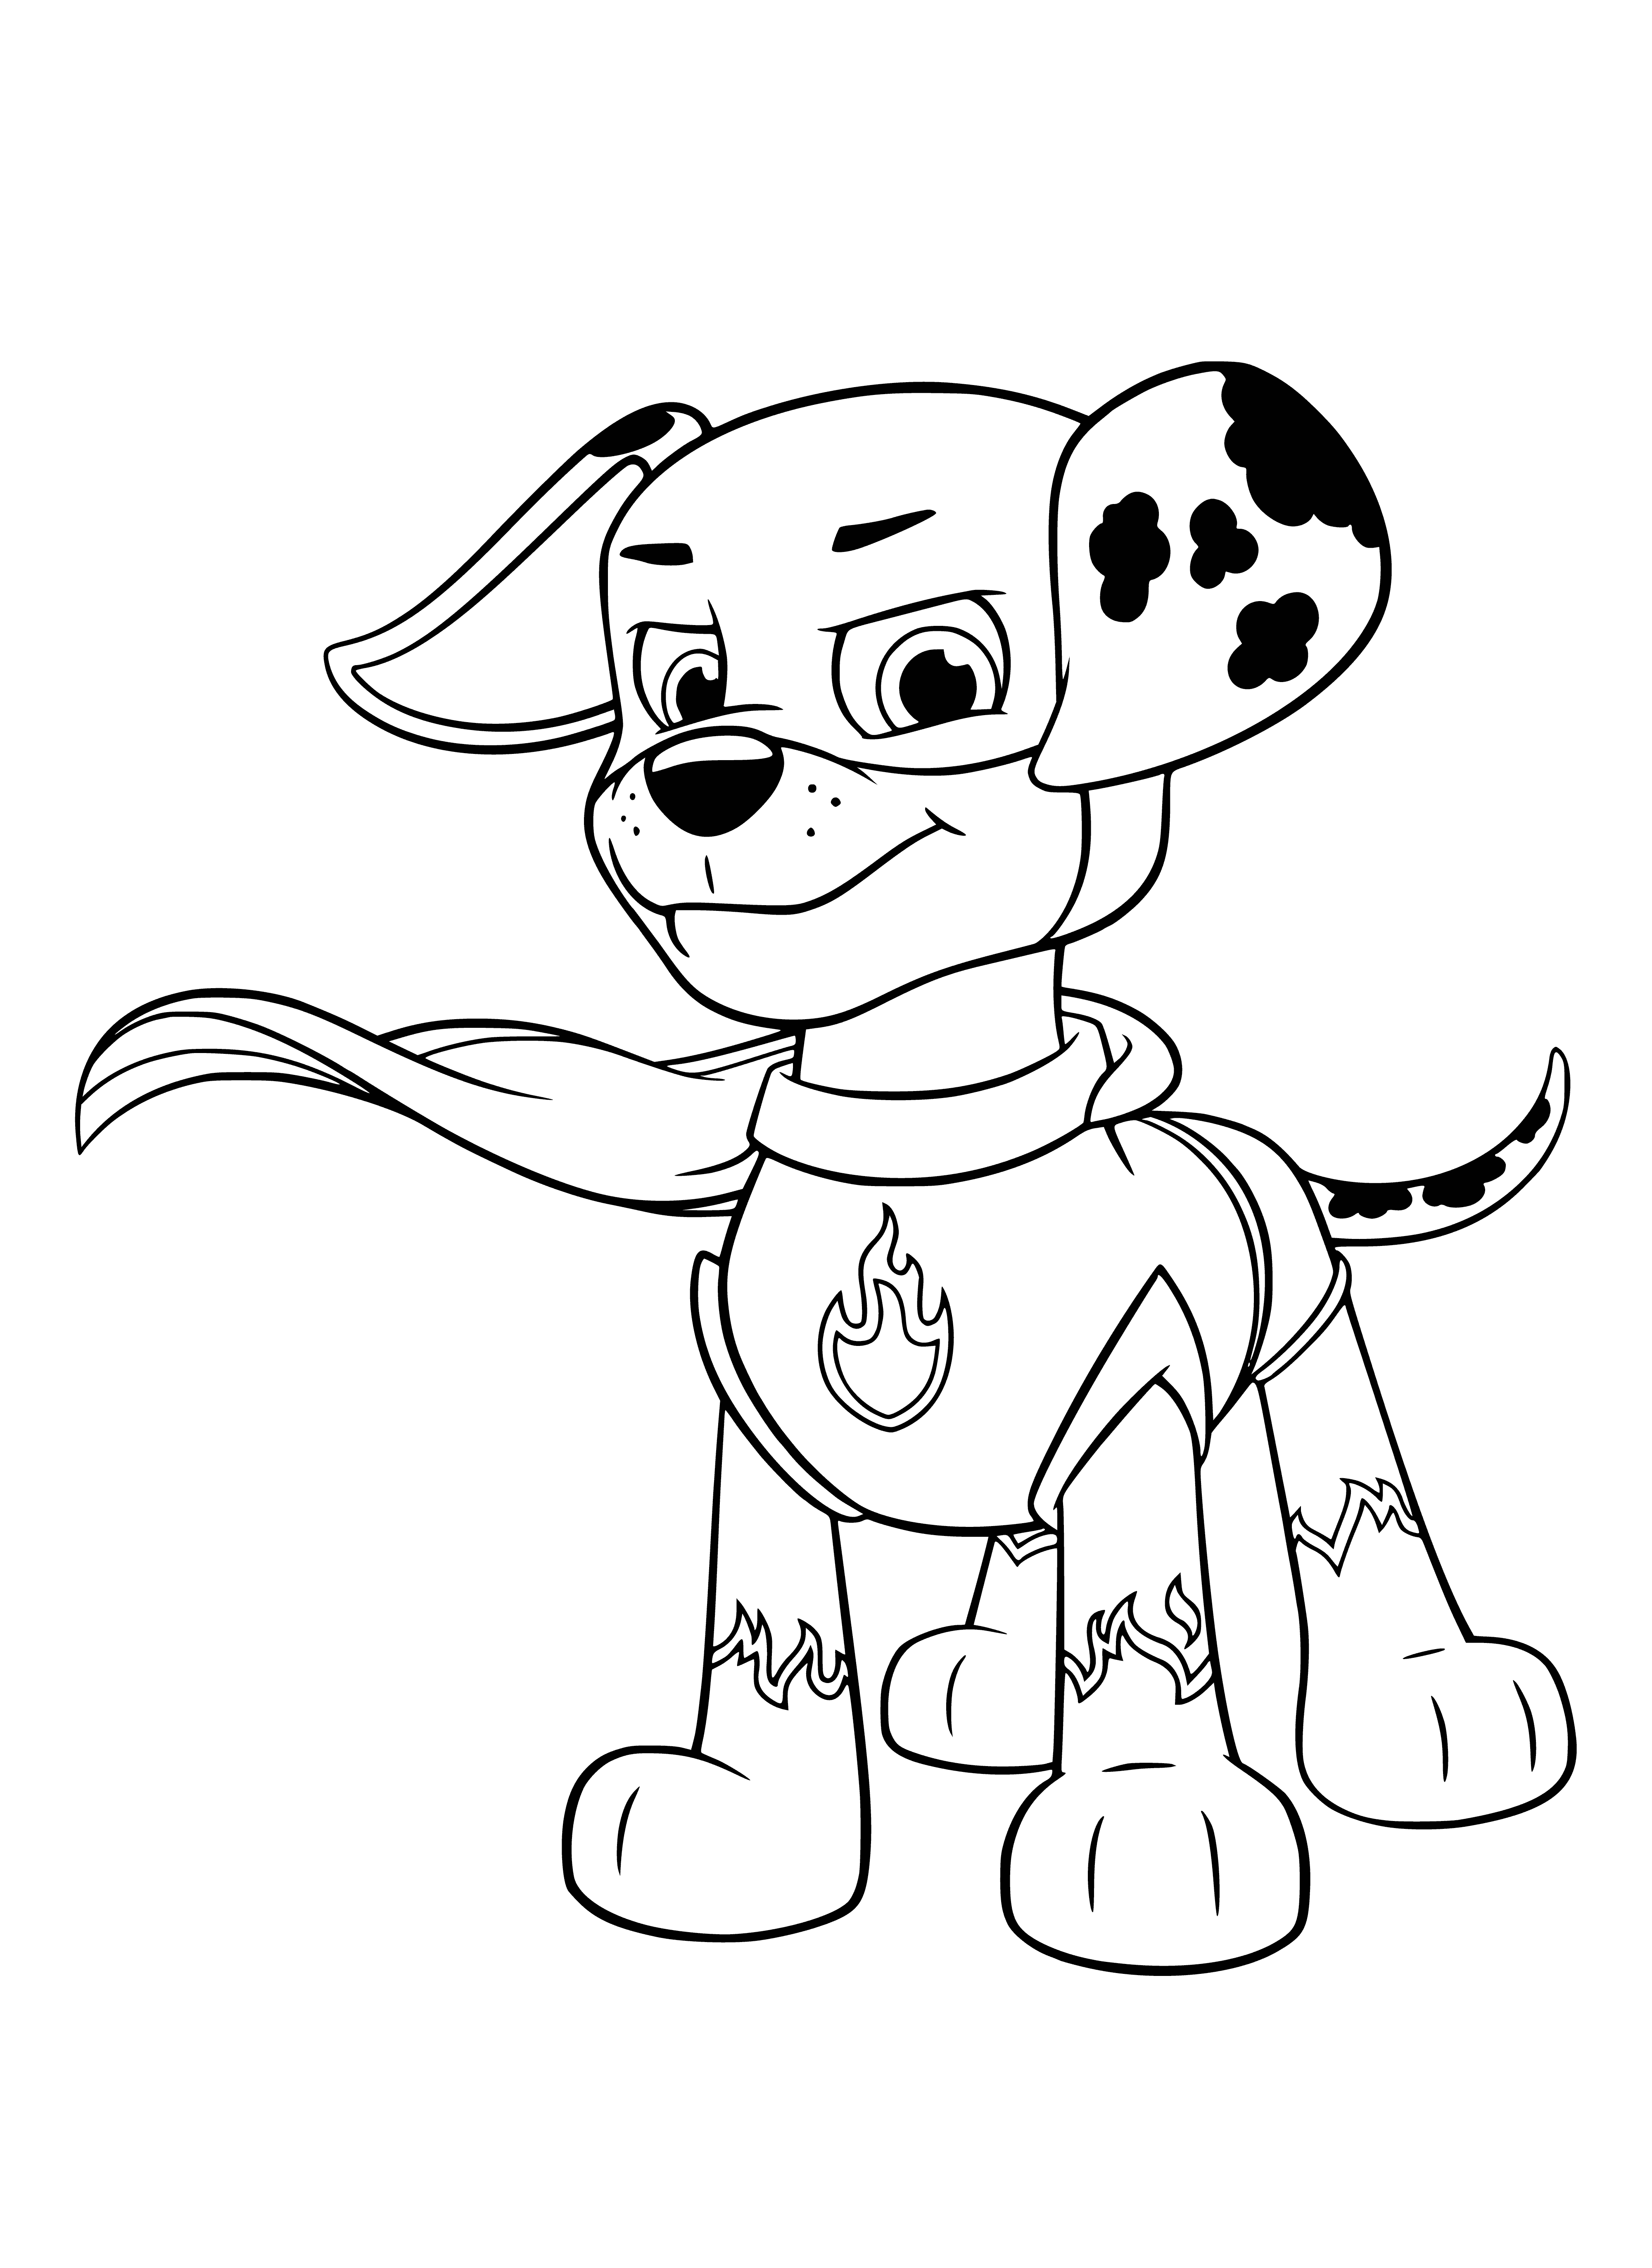 coloring page: Police dog with dark & light brown coat and wallet, wearing uniform & hat w/ light brown badge. #policedog